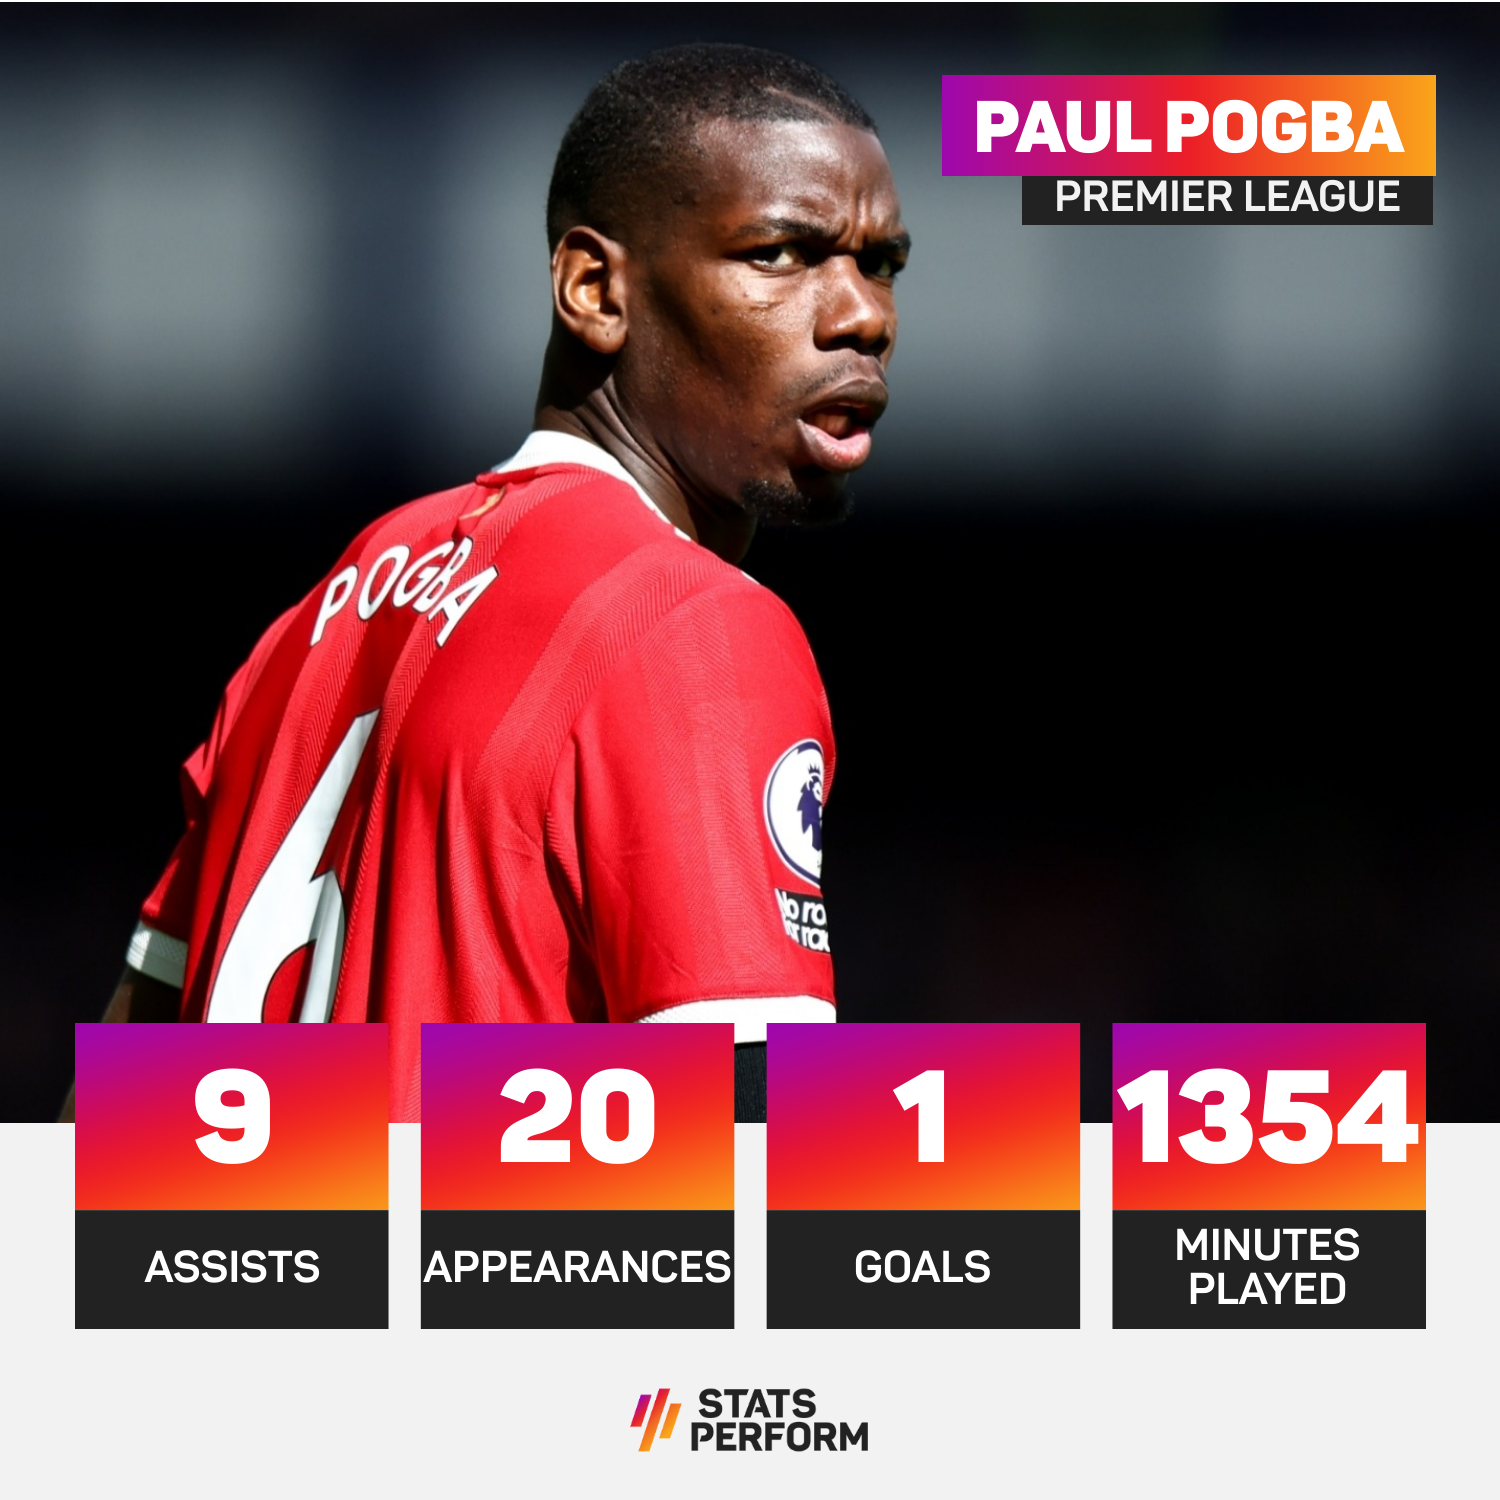 Paul Pogba has played 20 times for Manchester United this season